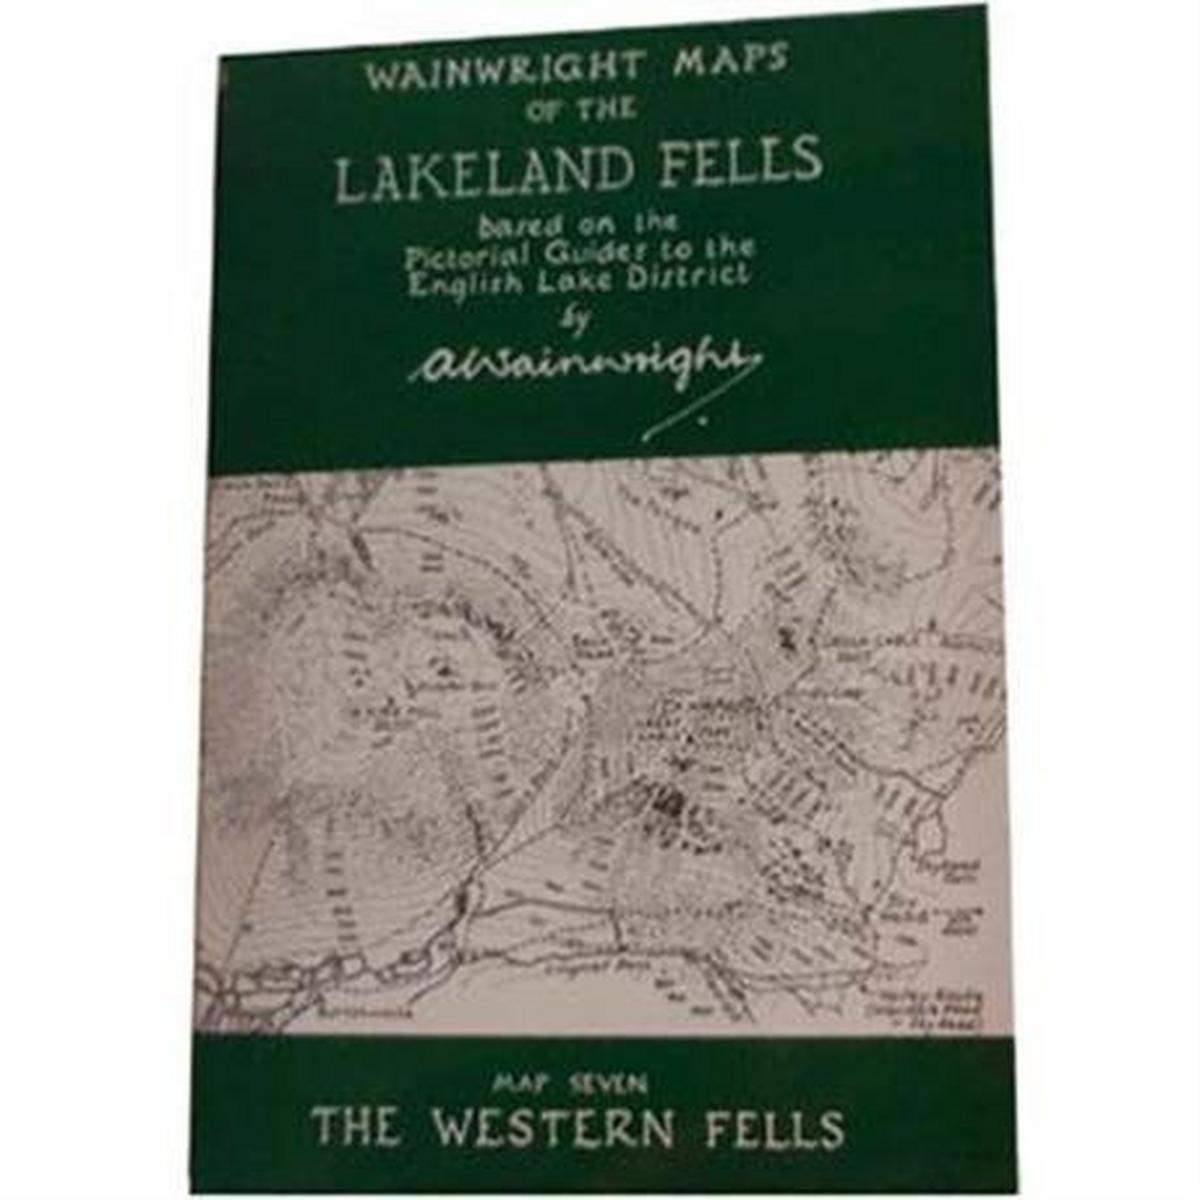 Miscellaneous Wainwright Map No.7 - The Western Fells